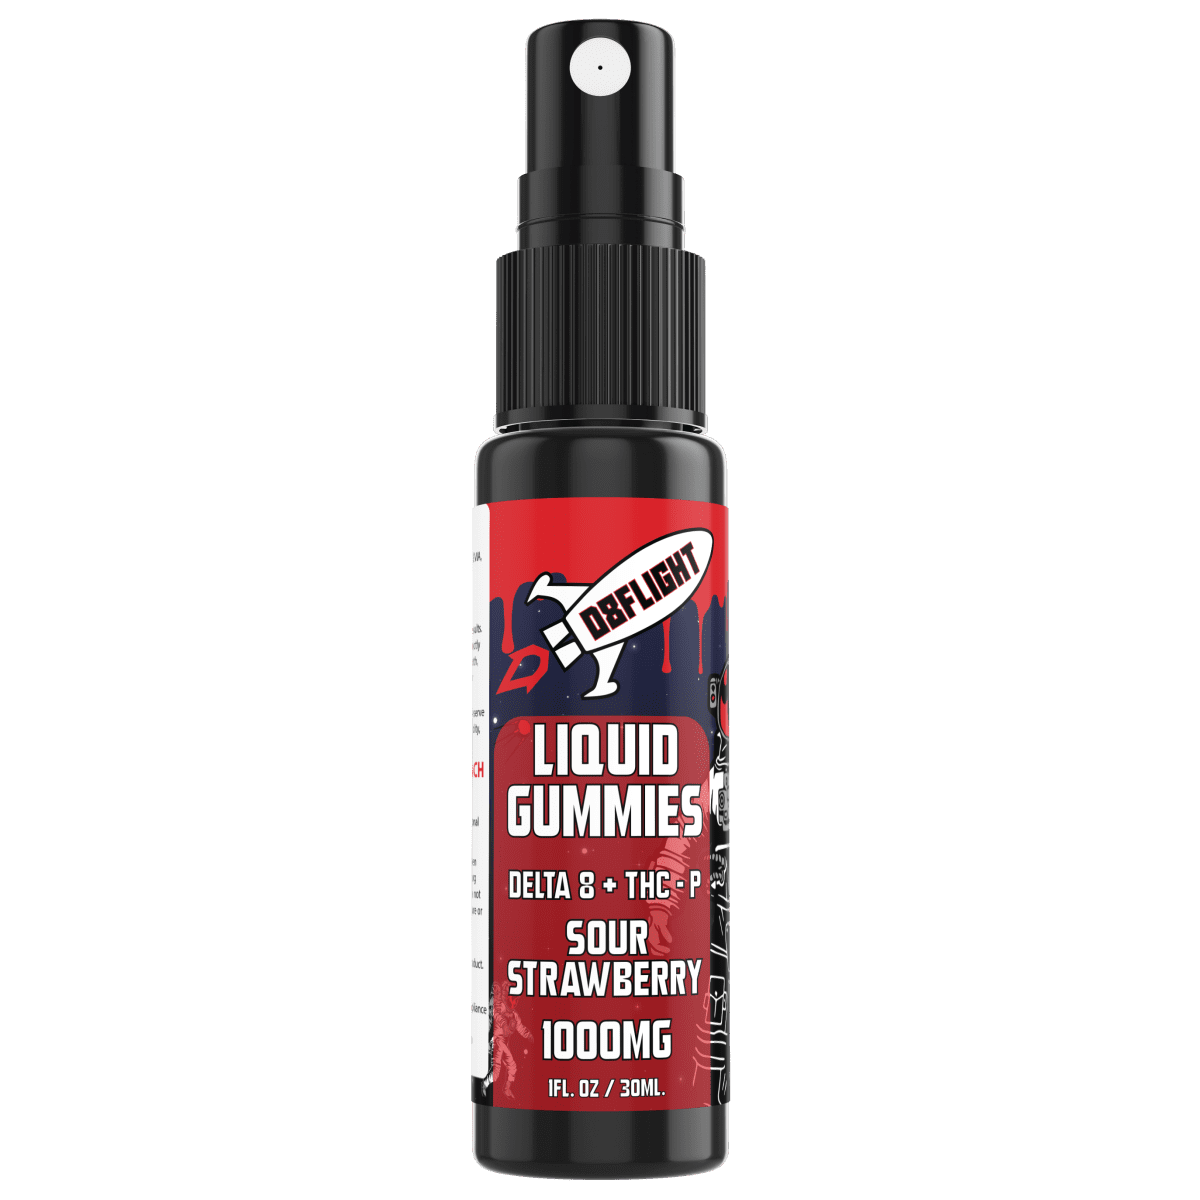 Liquid gummy fast acting mouth spray sour strawberry